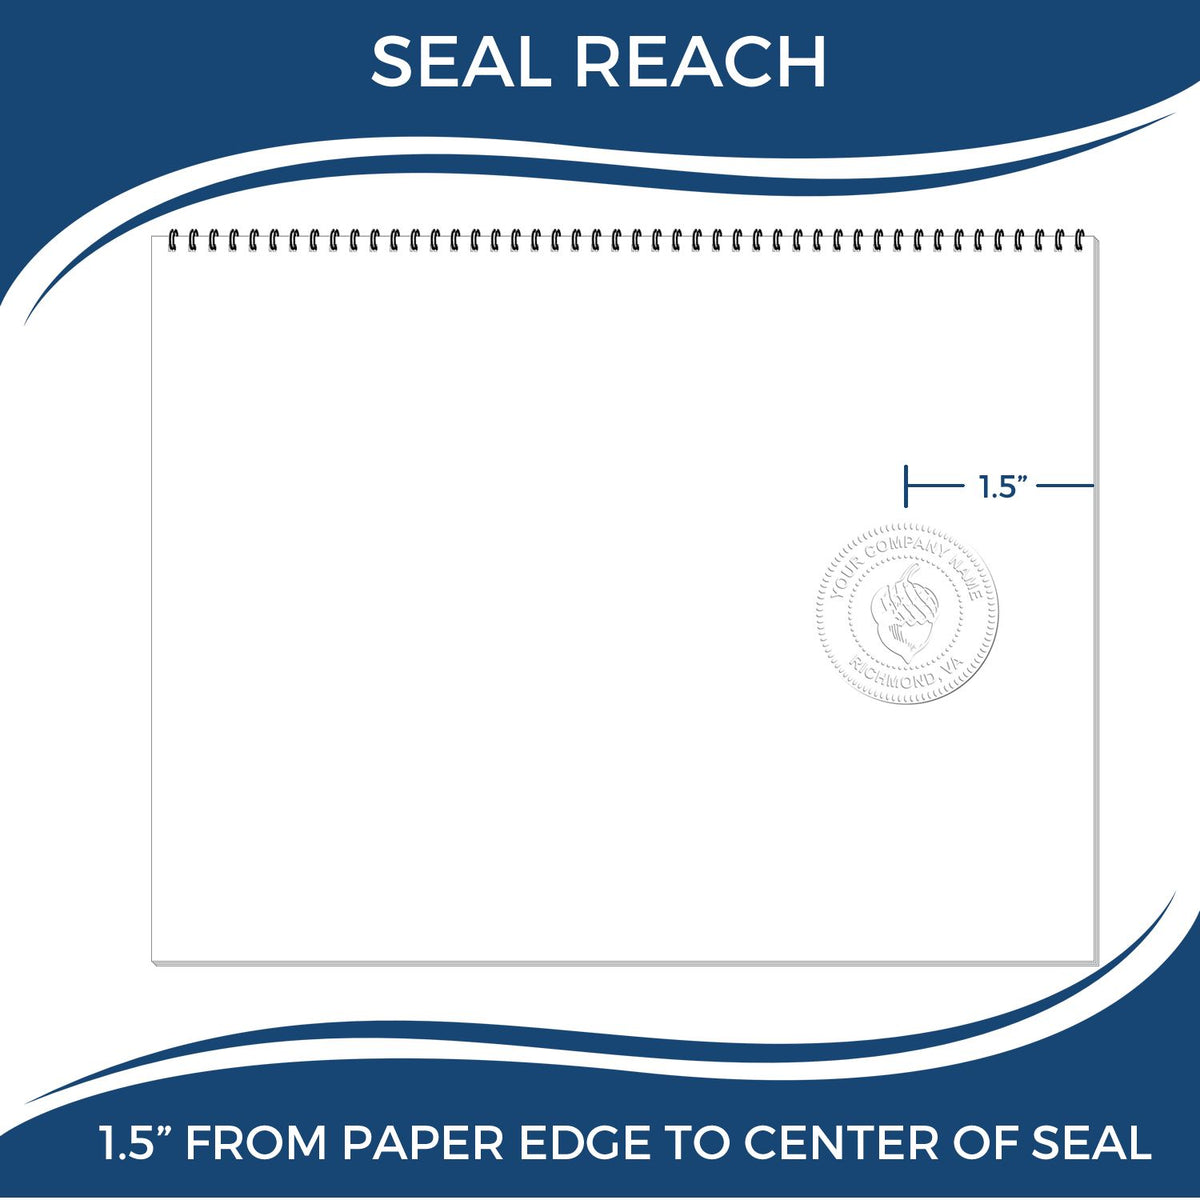 An infographic showing the seal reach which is represented by a ruler and a miniature seal image of the Handheld New York Professional Geologist Embosser